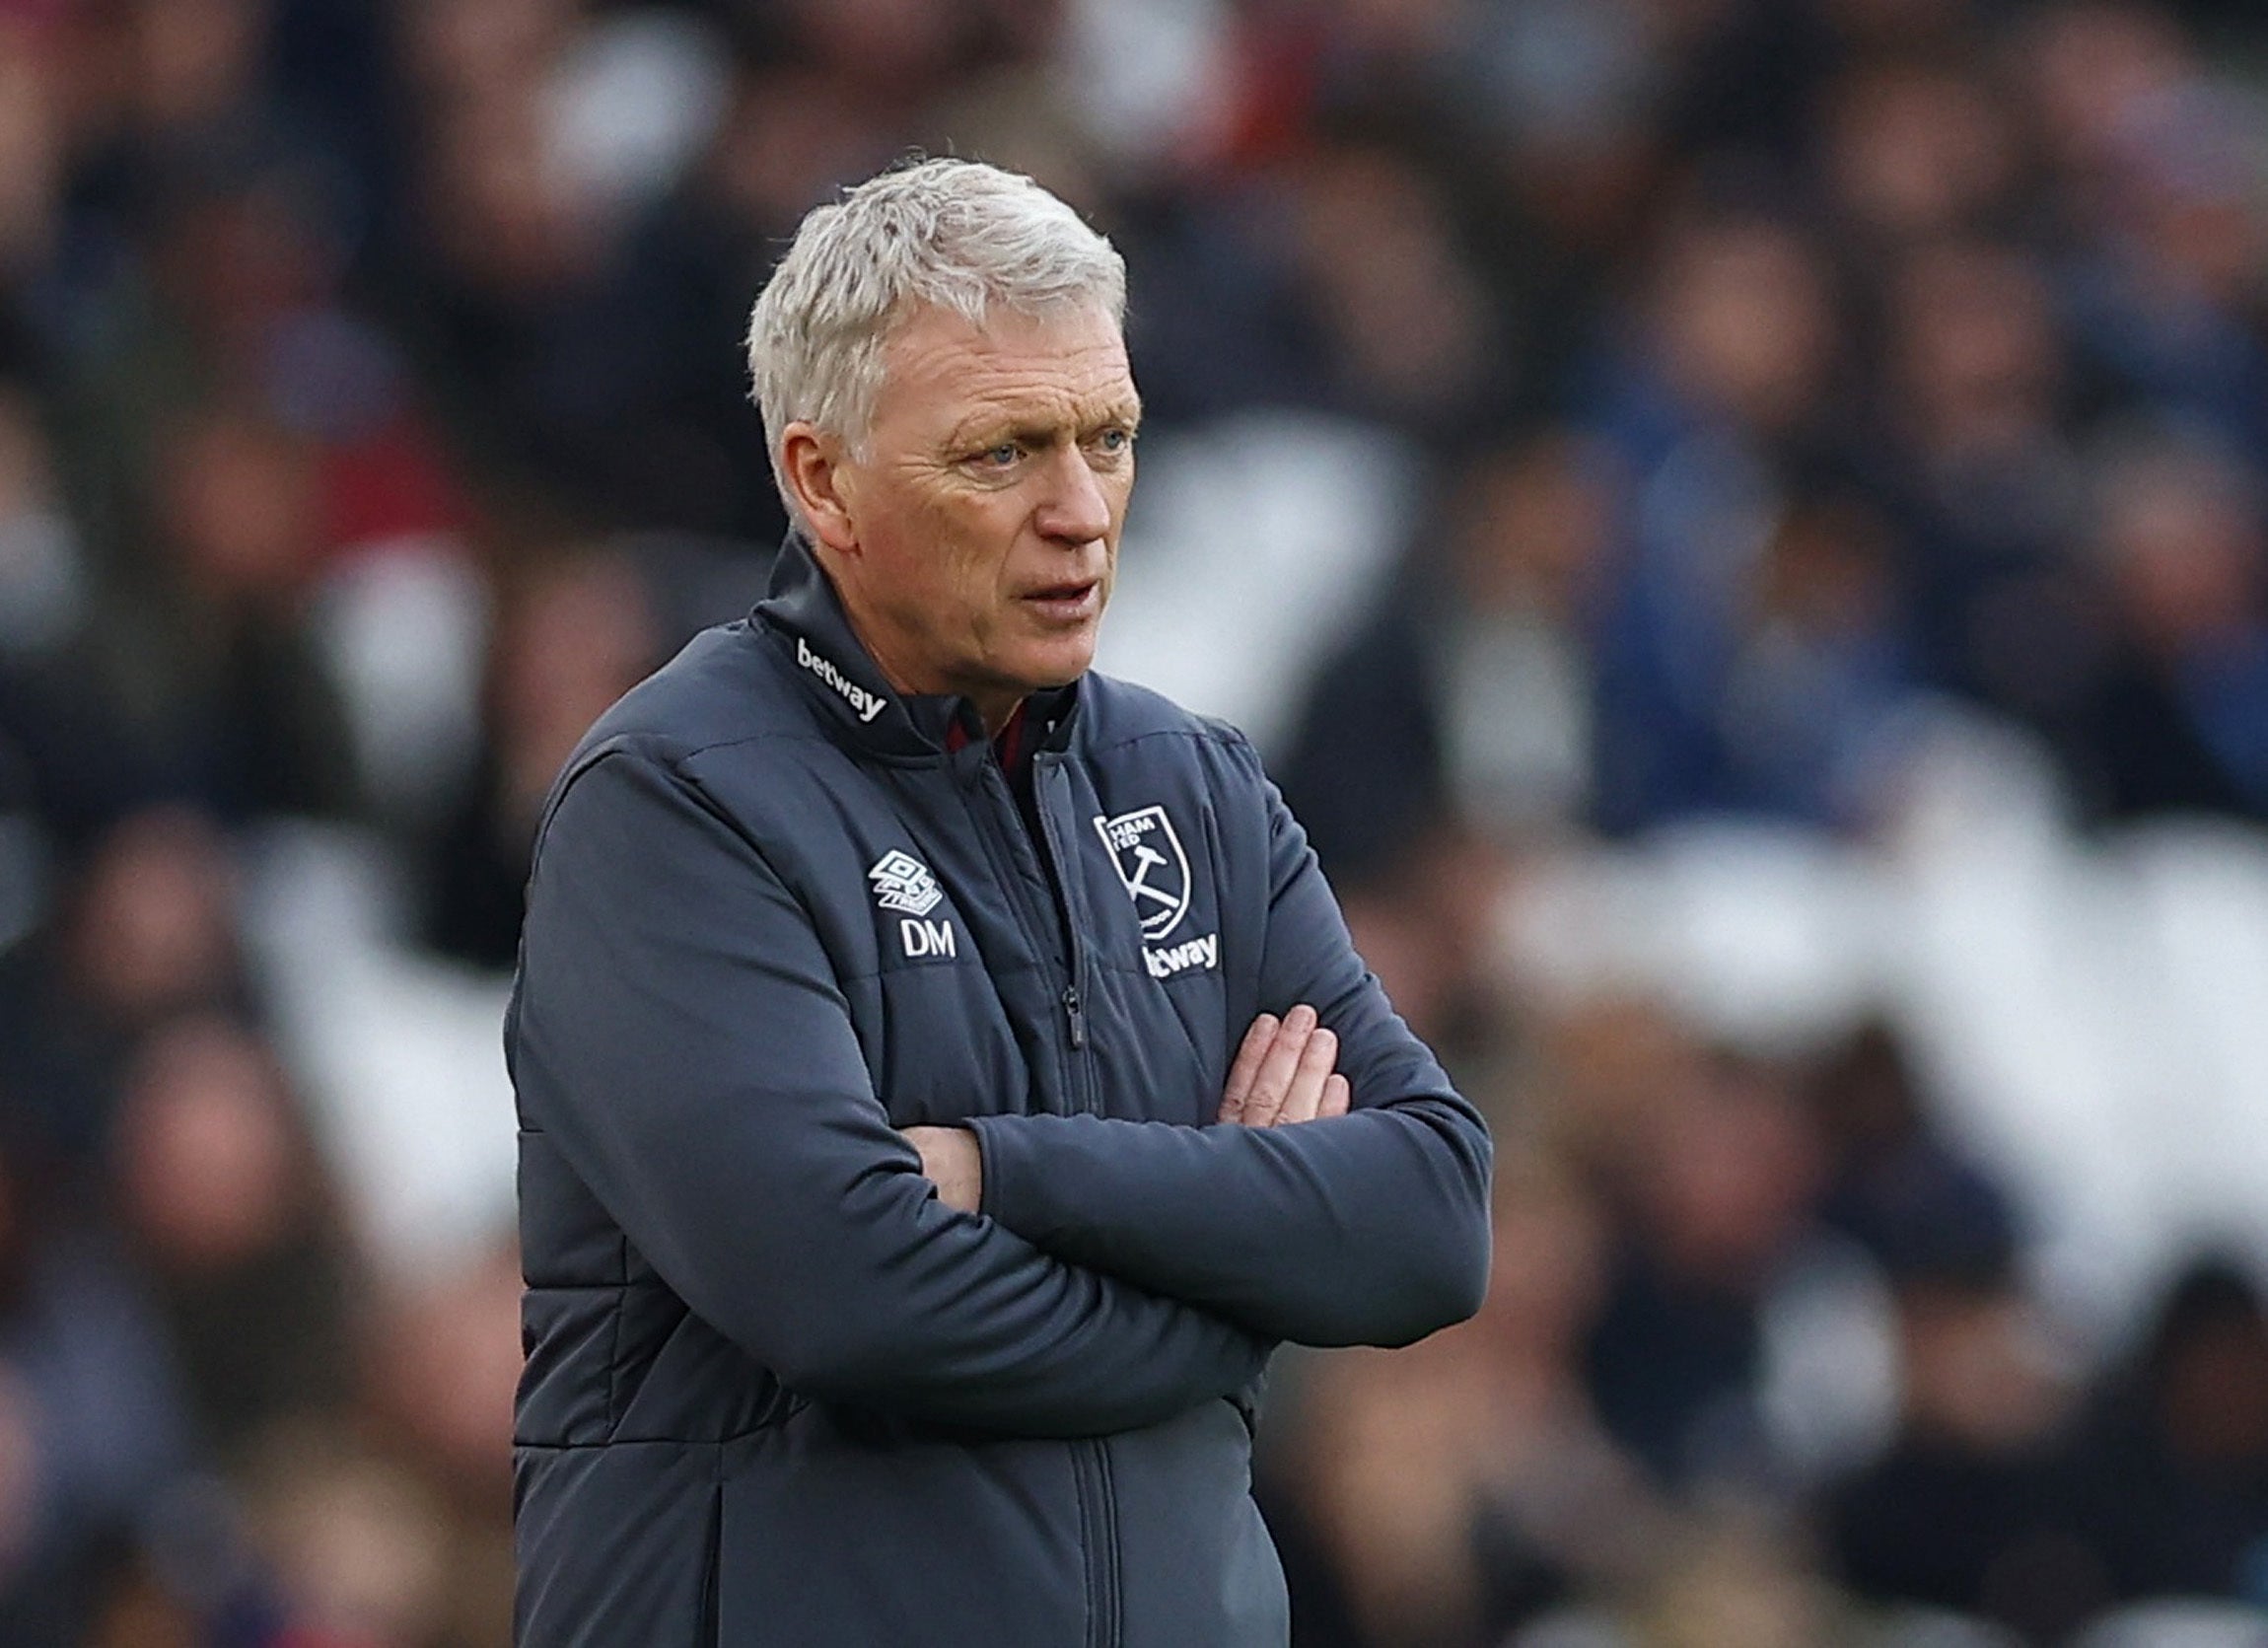 Moyes will be under pressure following his side’s dismal collapse